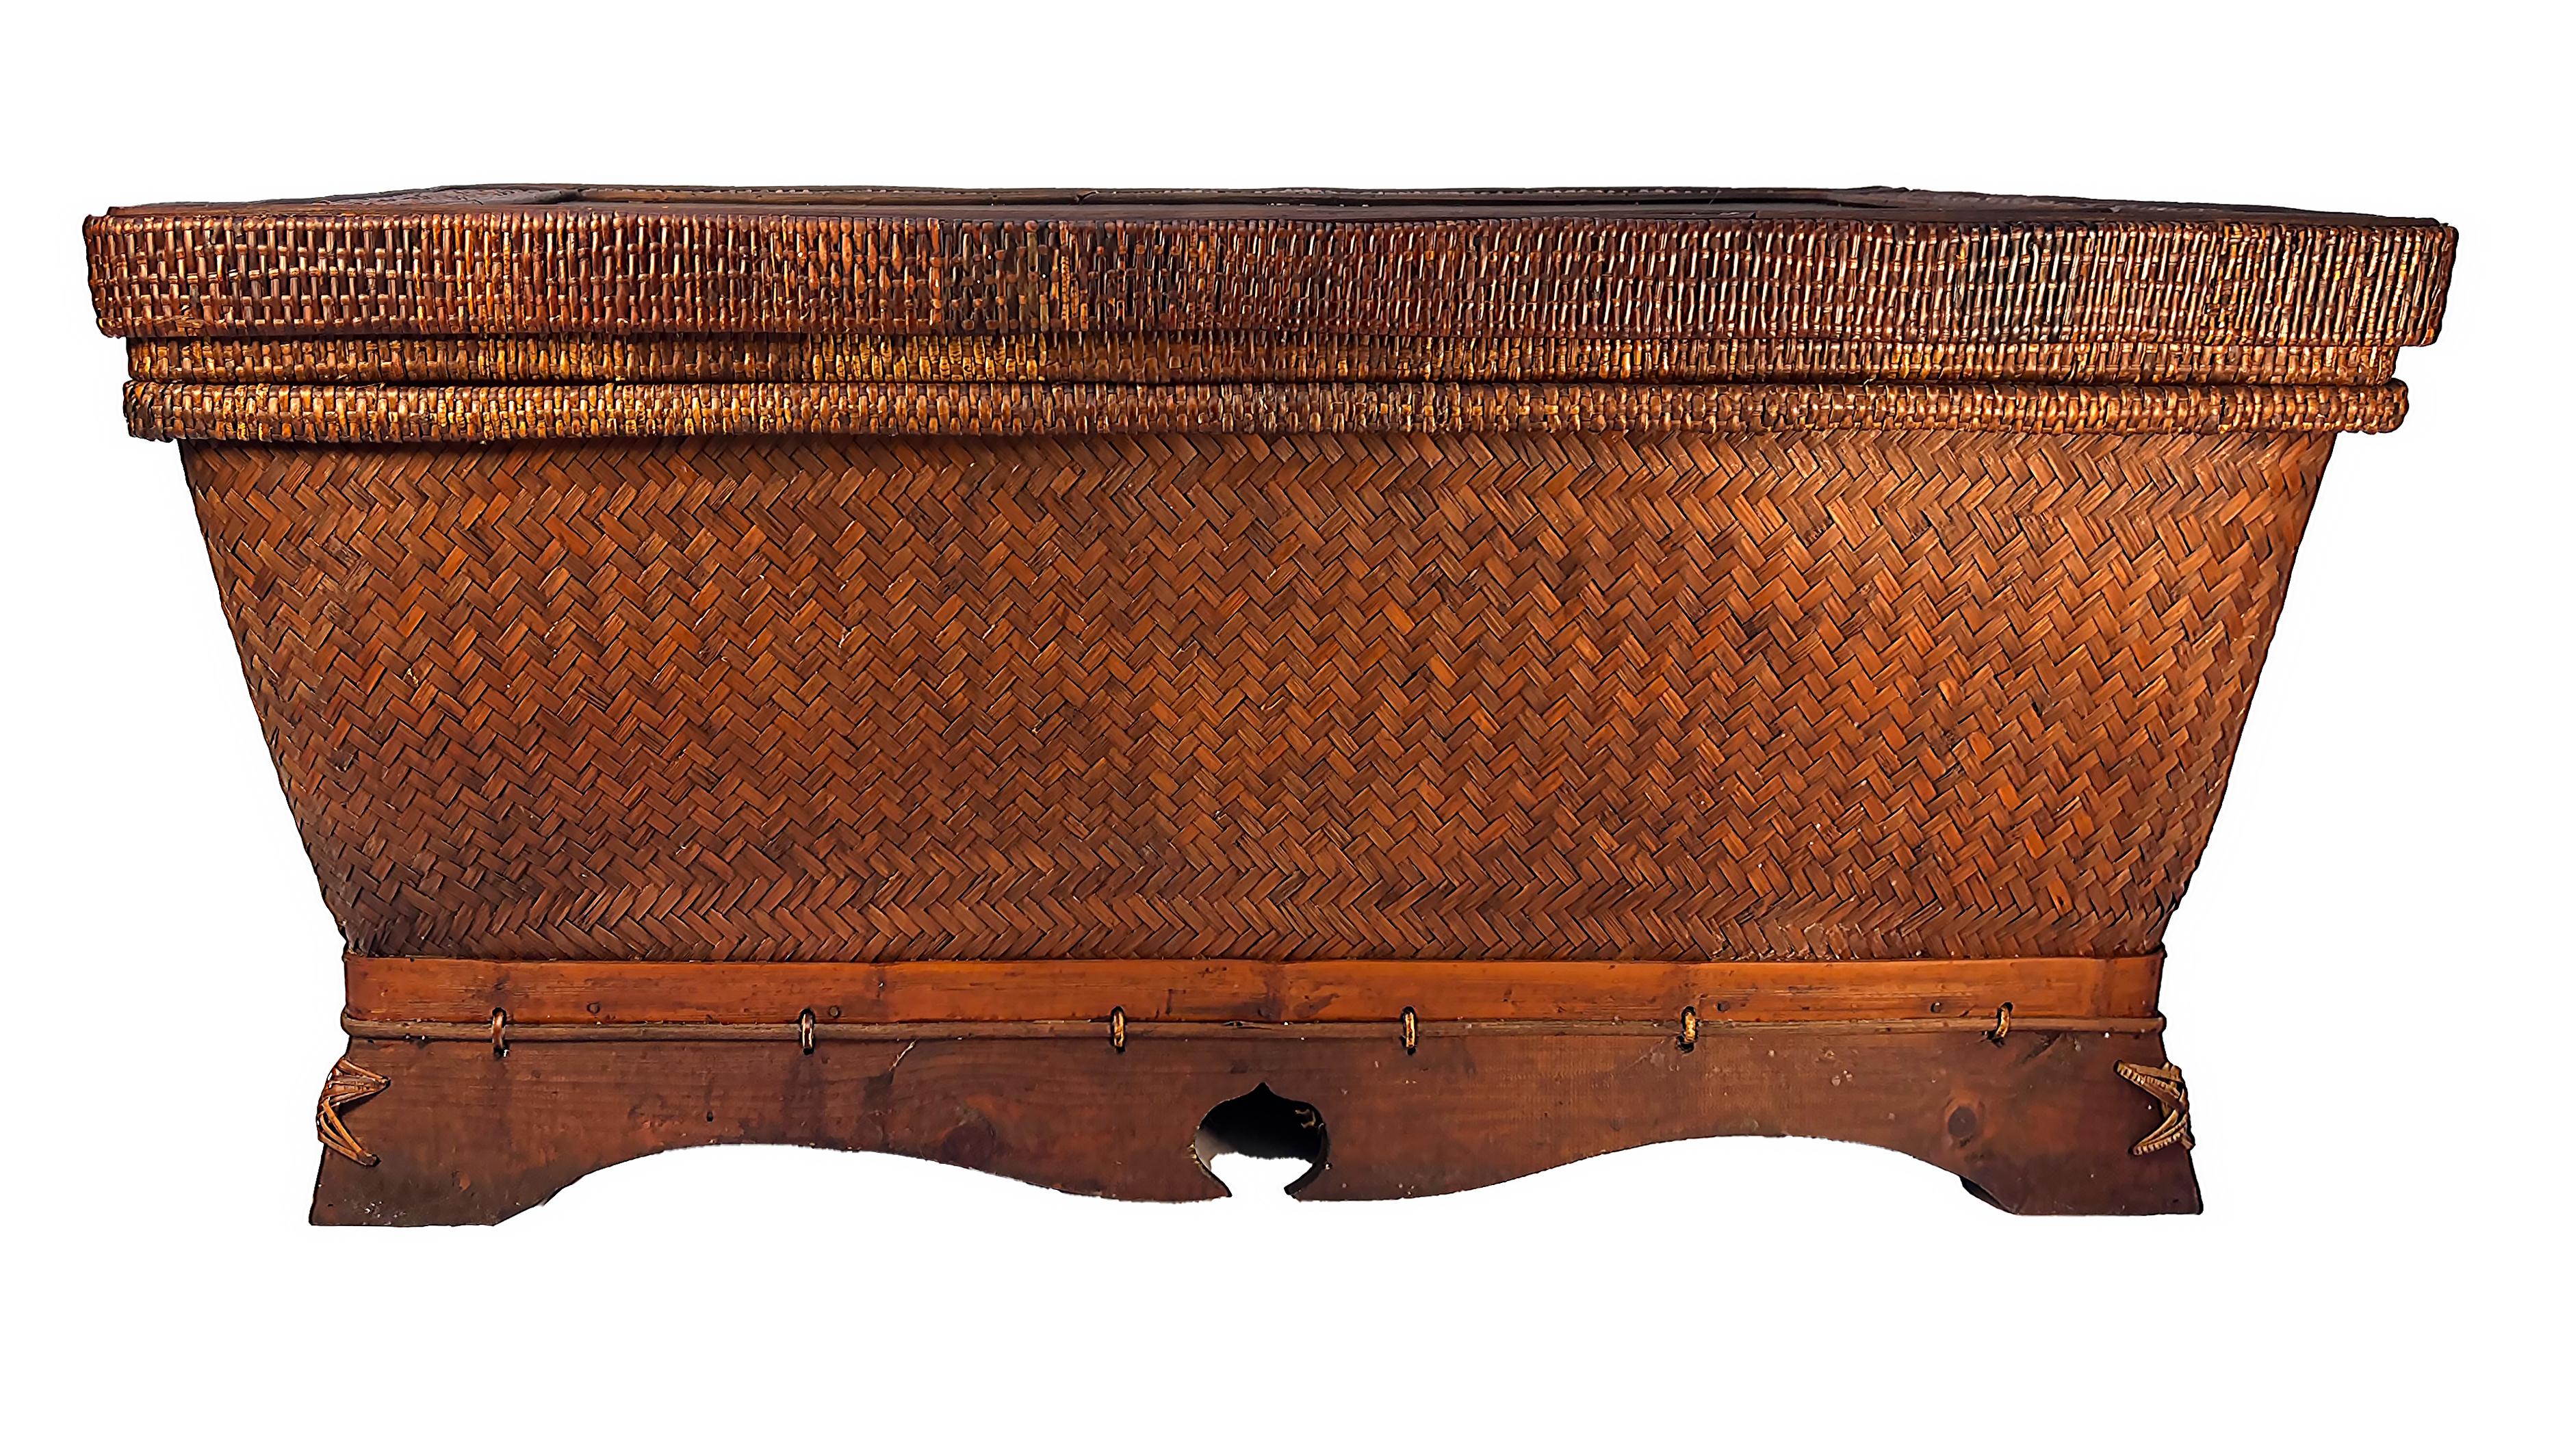 Antique Chinese Woven Rattan Chest Trunk or Coffee Table 

Offered for sale is a large early 20th century Chinese rattan and wood chest with a removable lid. The chest is constructed in wood and clad with woven rattan that has achieved a rich